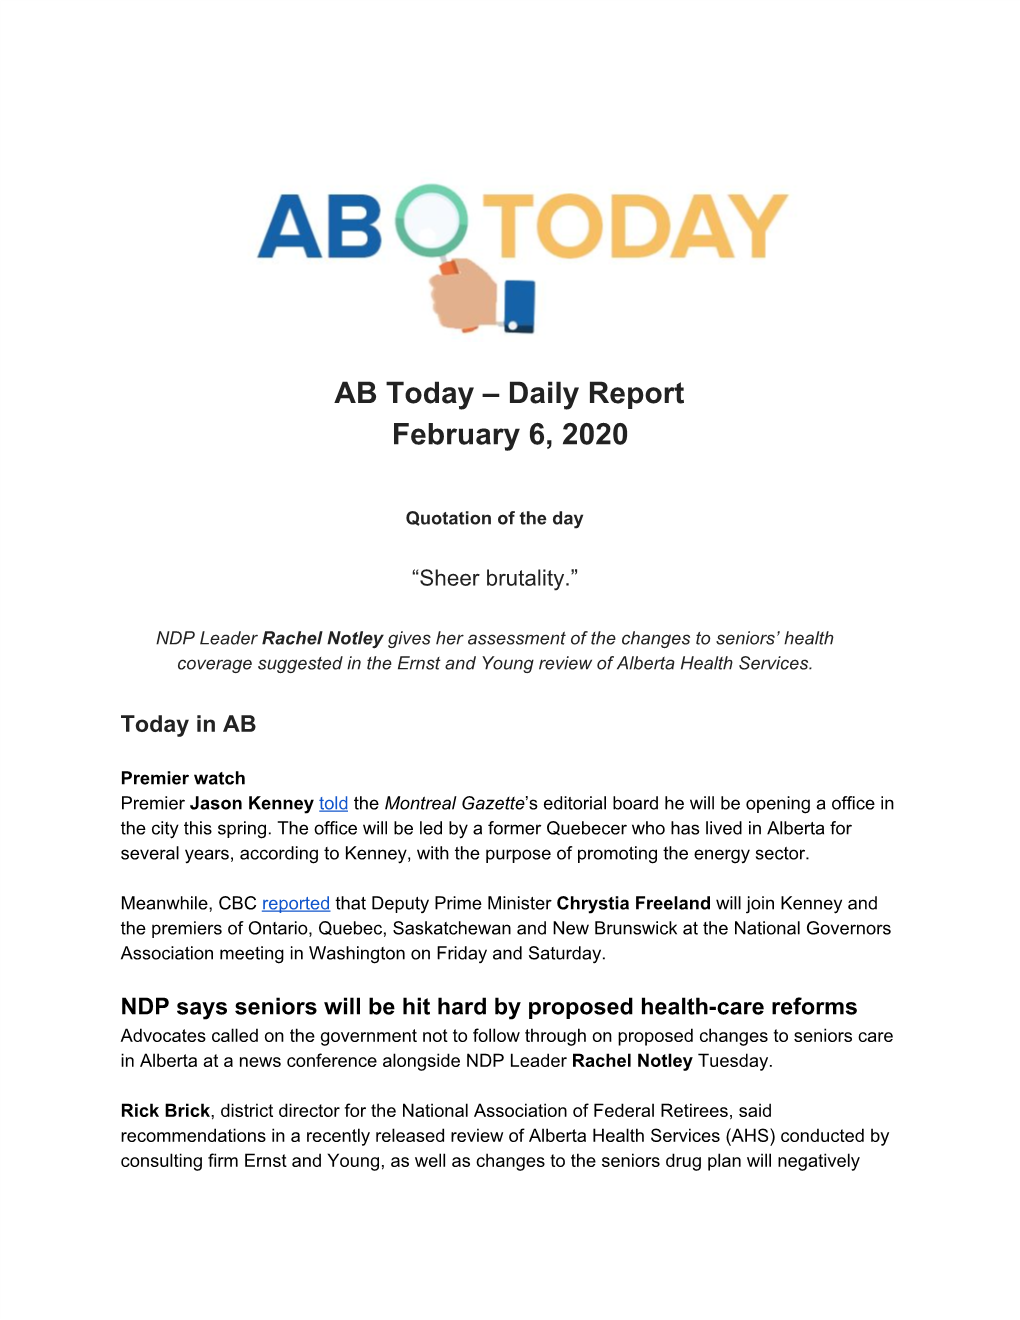 AB Today – Daily Report February 6, 2020